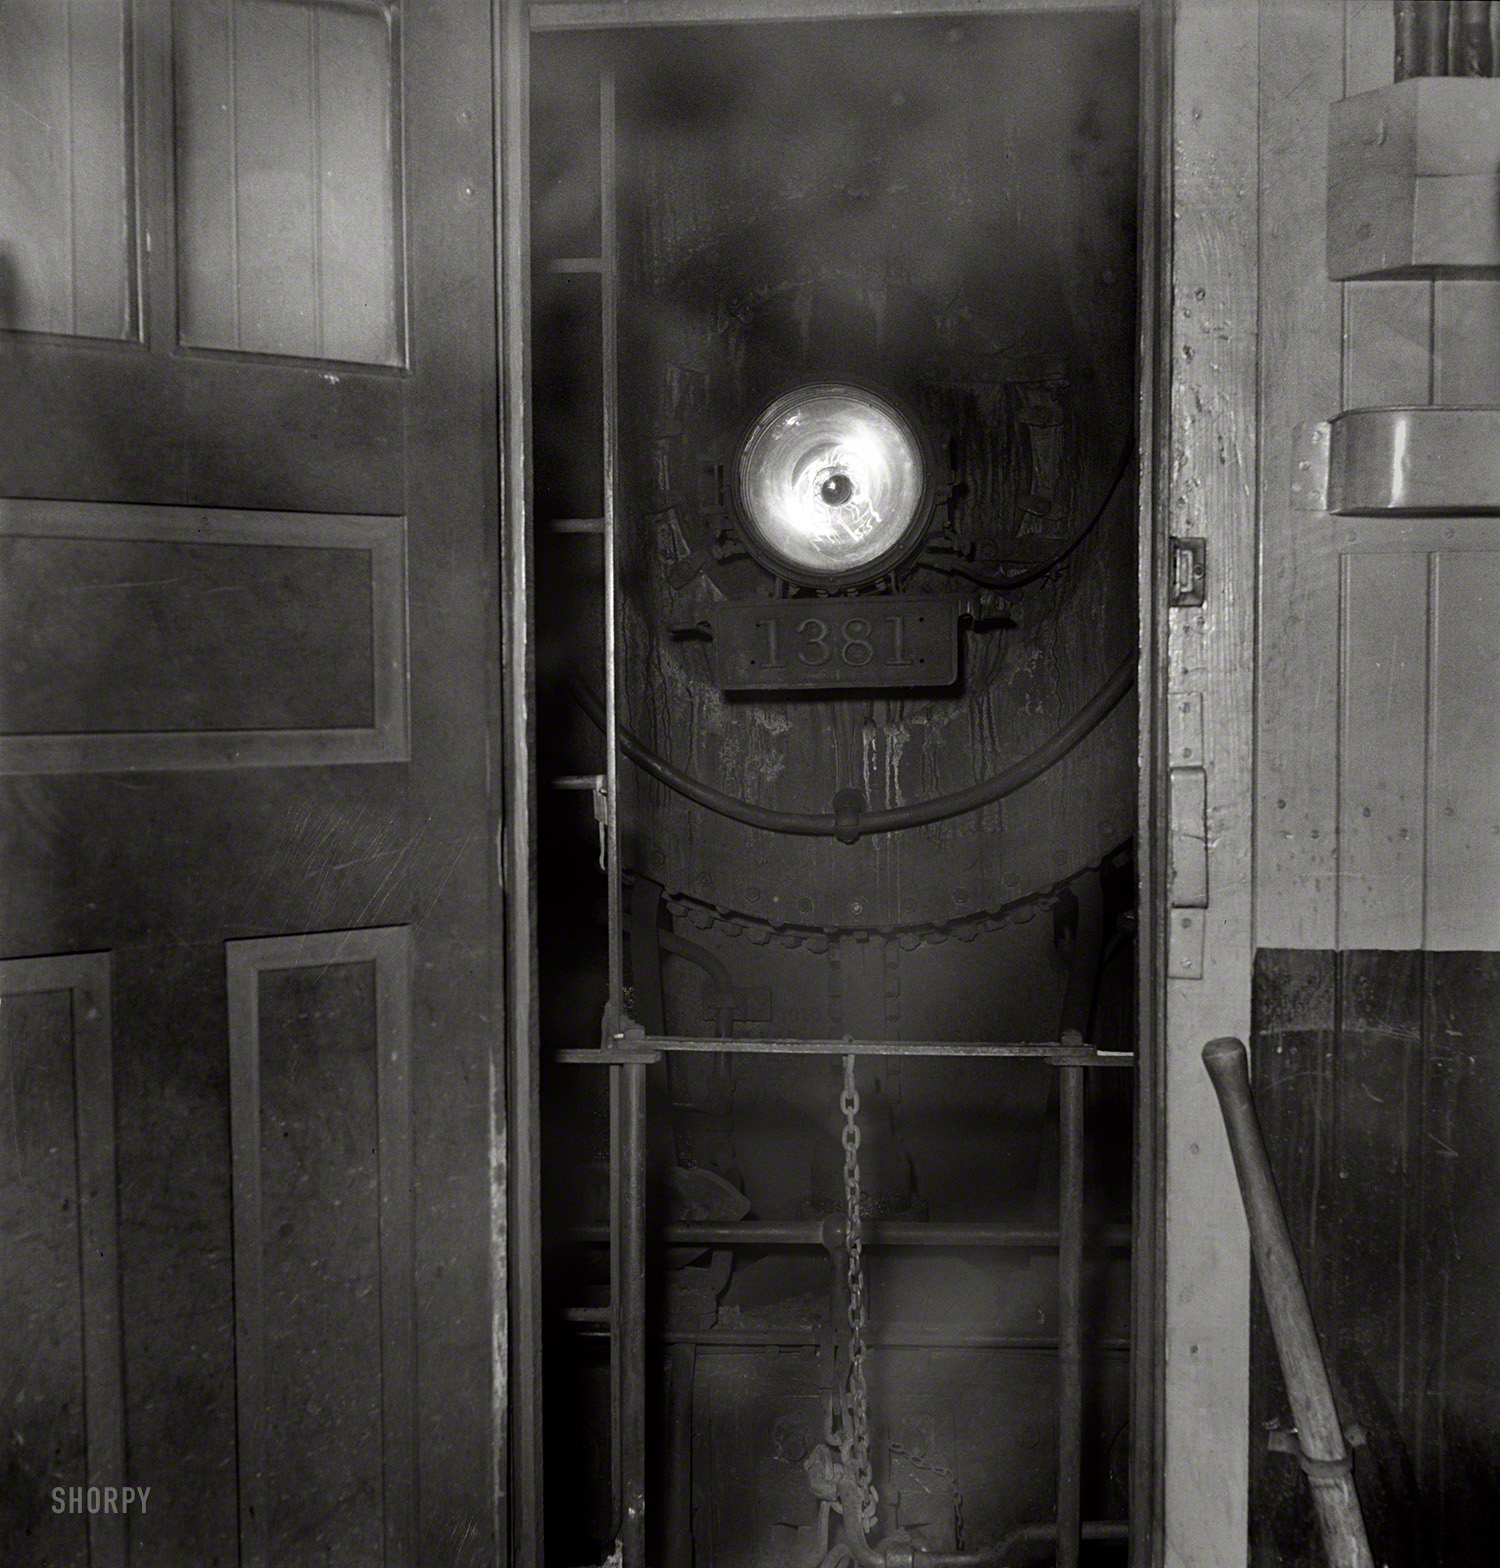 January 1943. "Freight operations on the Indiana Harbor Belt railroad between Chicago, Illinois and Hammond, Indiana. Locomotive coupled to caboose." Photo by Jack Delano for the Office of War Information. View full size.